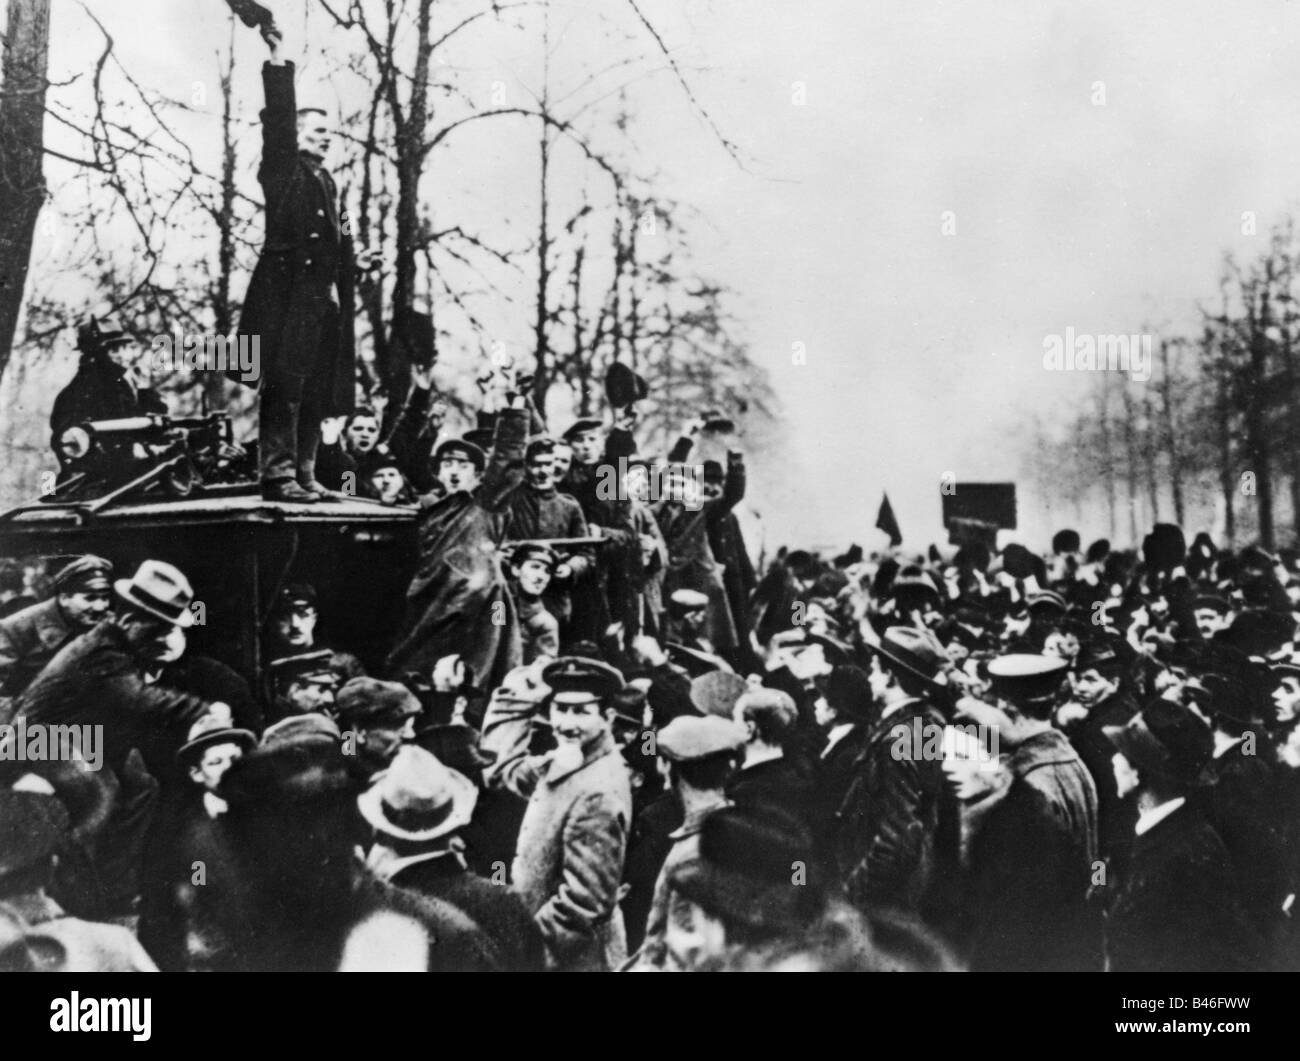 geography / travel, Germany, politic, demonstrations, protest manisfestation against the attempted counter-revolutionary coup from 6.12.1918, Siegesallee, Berlin, 7.12.1918, Wilhelm Pieck is speaking, speech, demonstration, Spartakus, communists, politics, Germany, 20th century, historic, historical, people, 1910s, Stock Photo